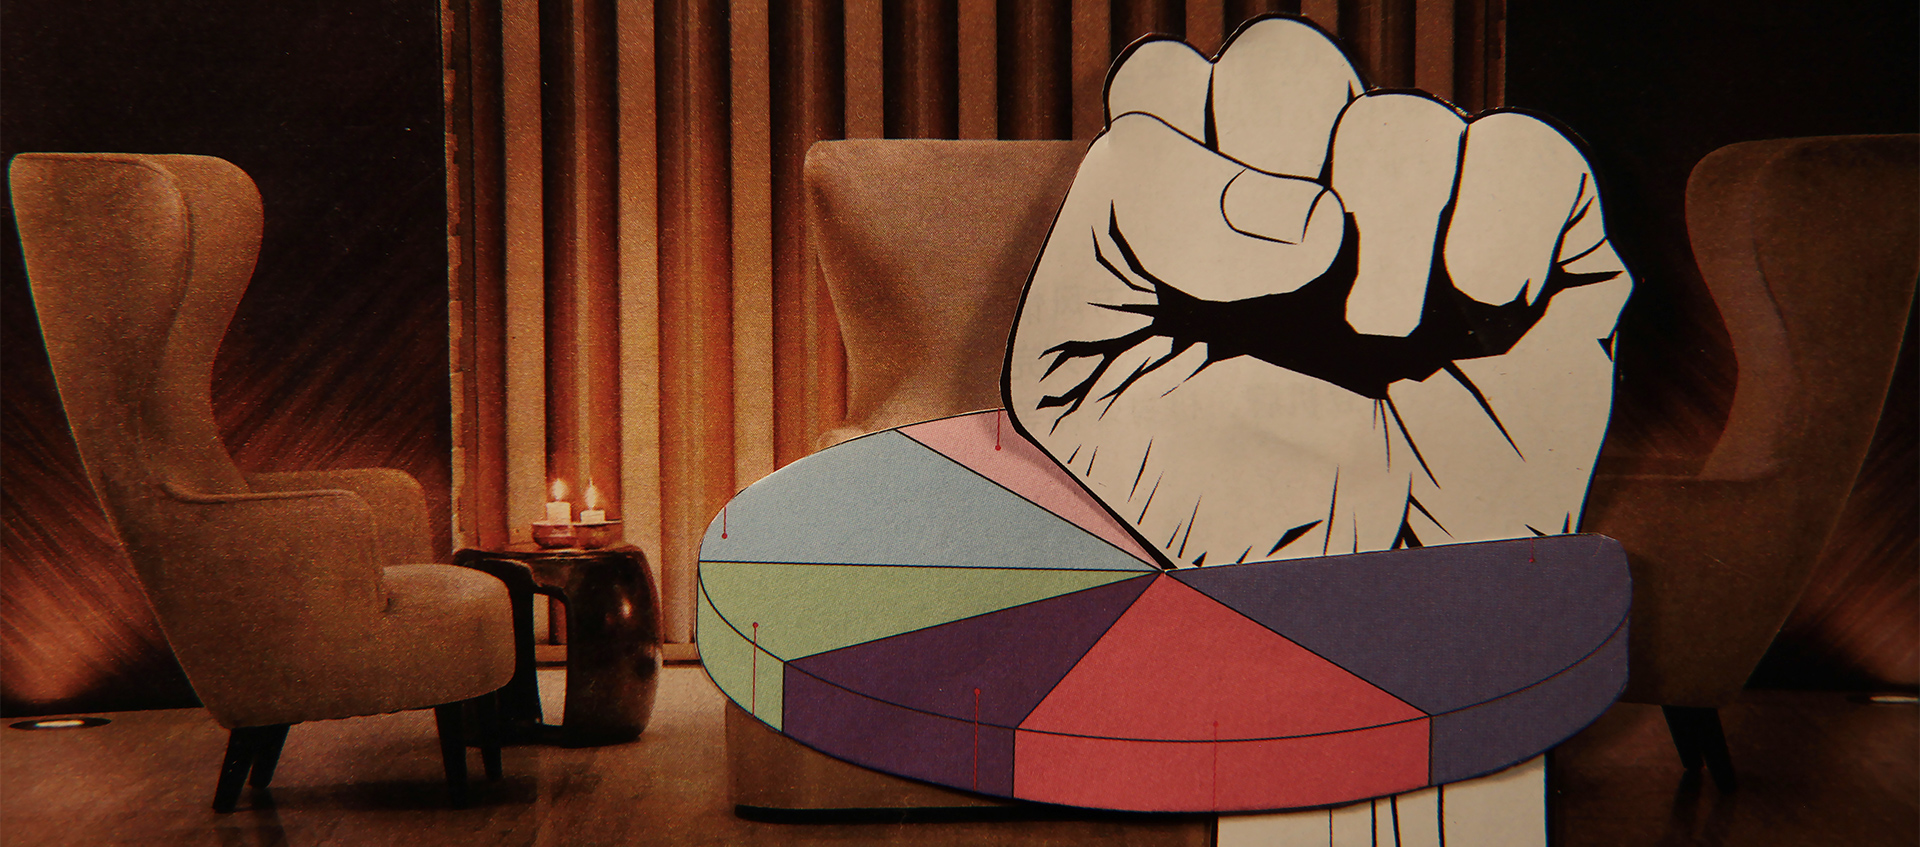 A paper fist punches through a pie chart with a vintage lounge setting as the background.